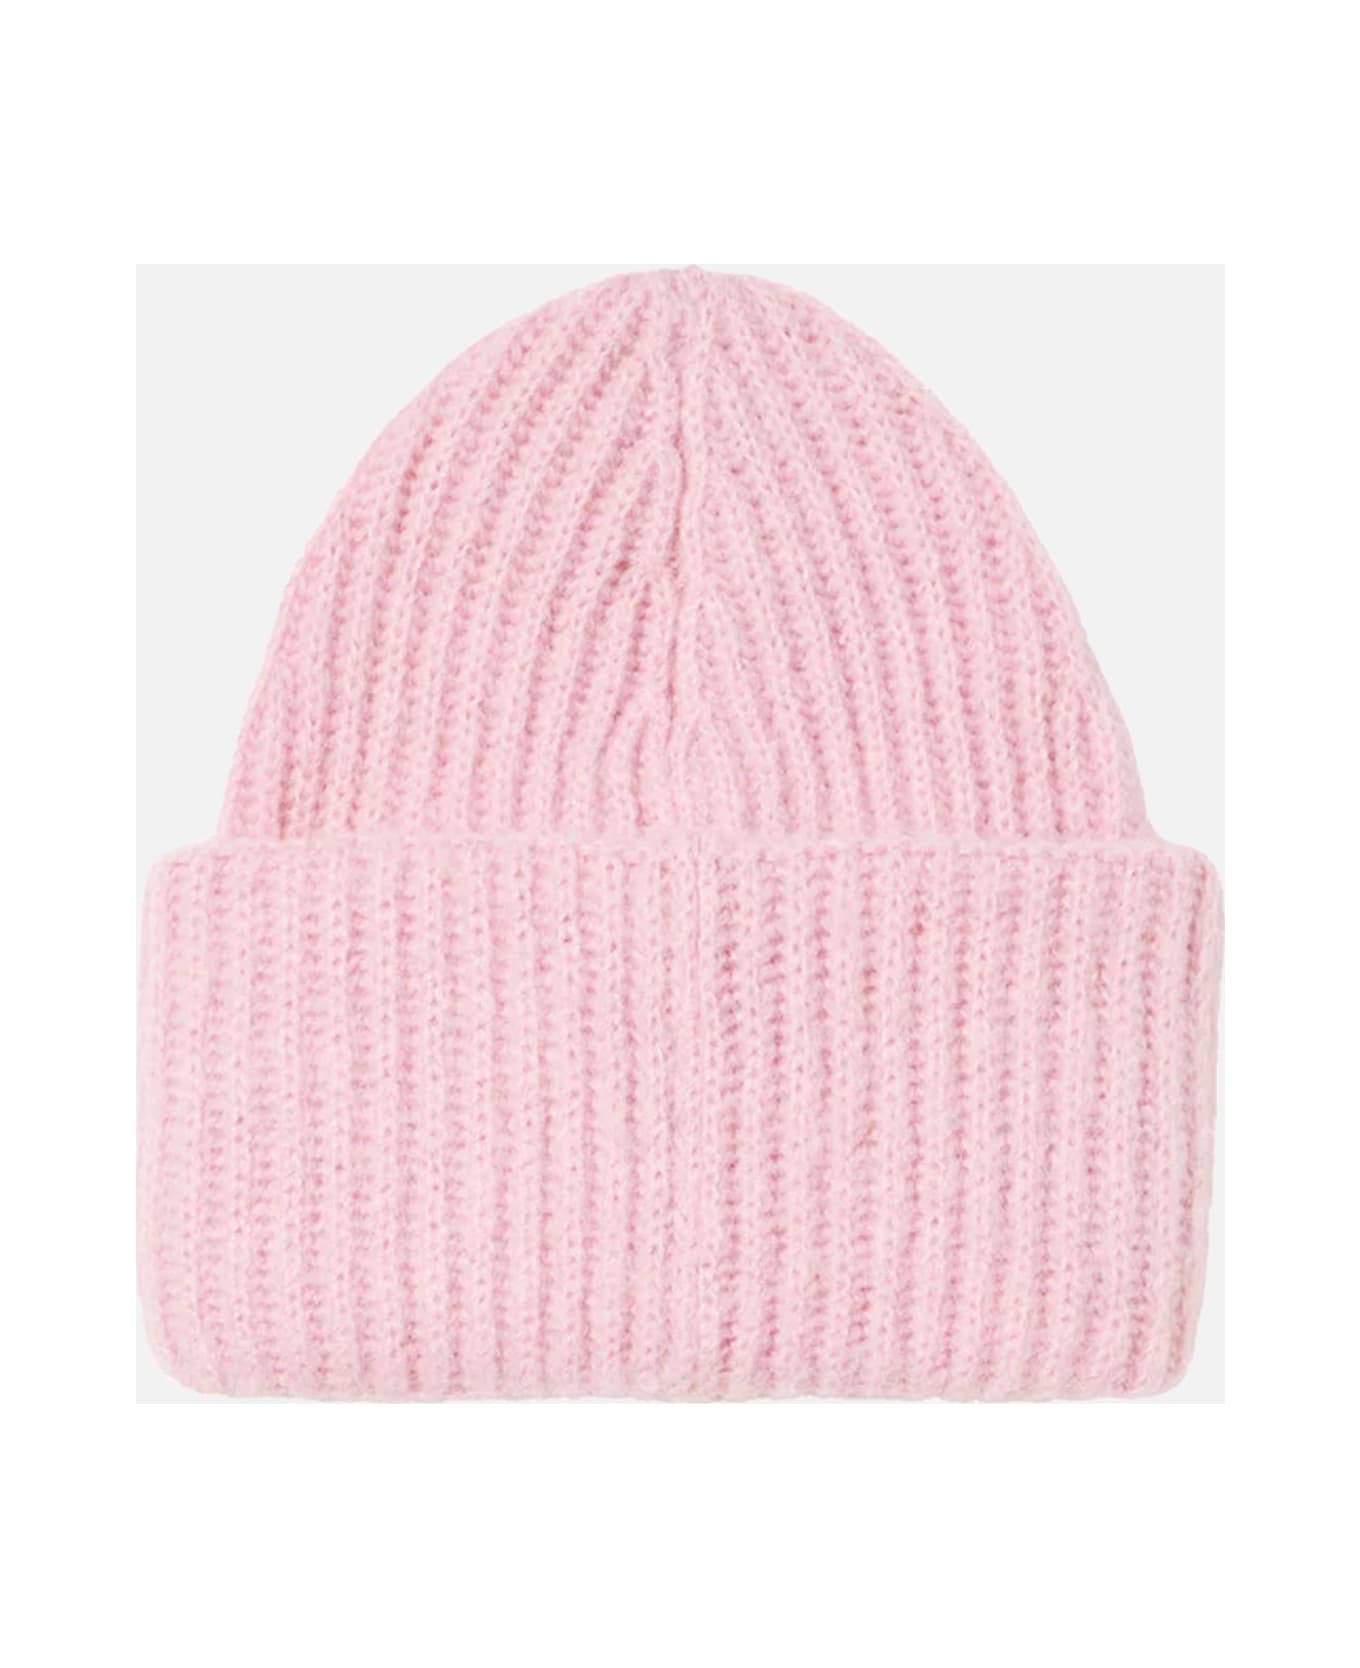 MC2 Saint Barth Woman Brushed And Ultra Soft Beanie With Hearts Appliqués - PINK